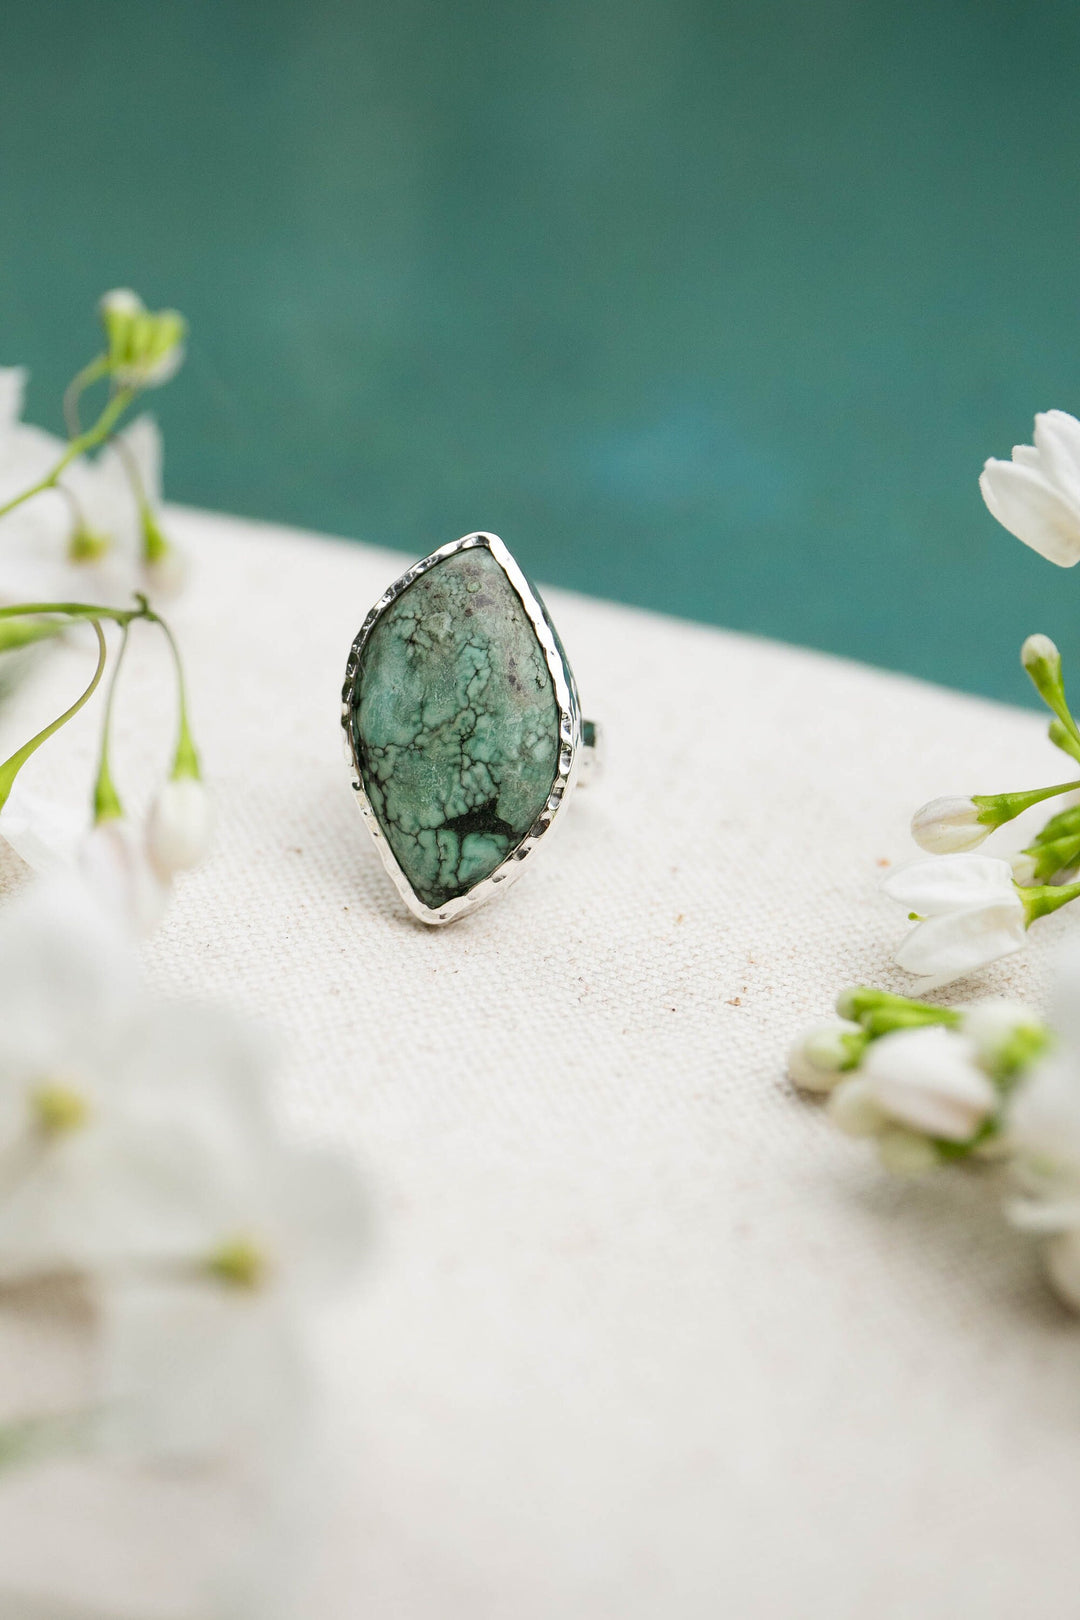 Genuine Turquoise Ring in Sterling Silver Setting with Beaten Band - Size 7.5 US